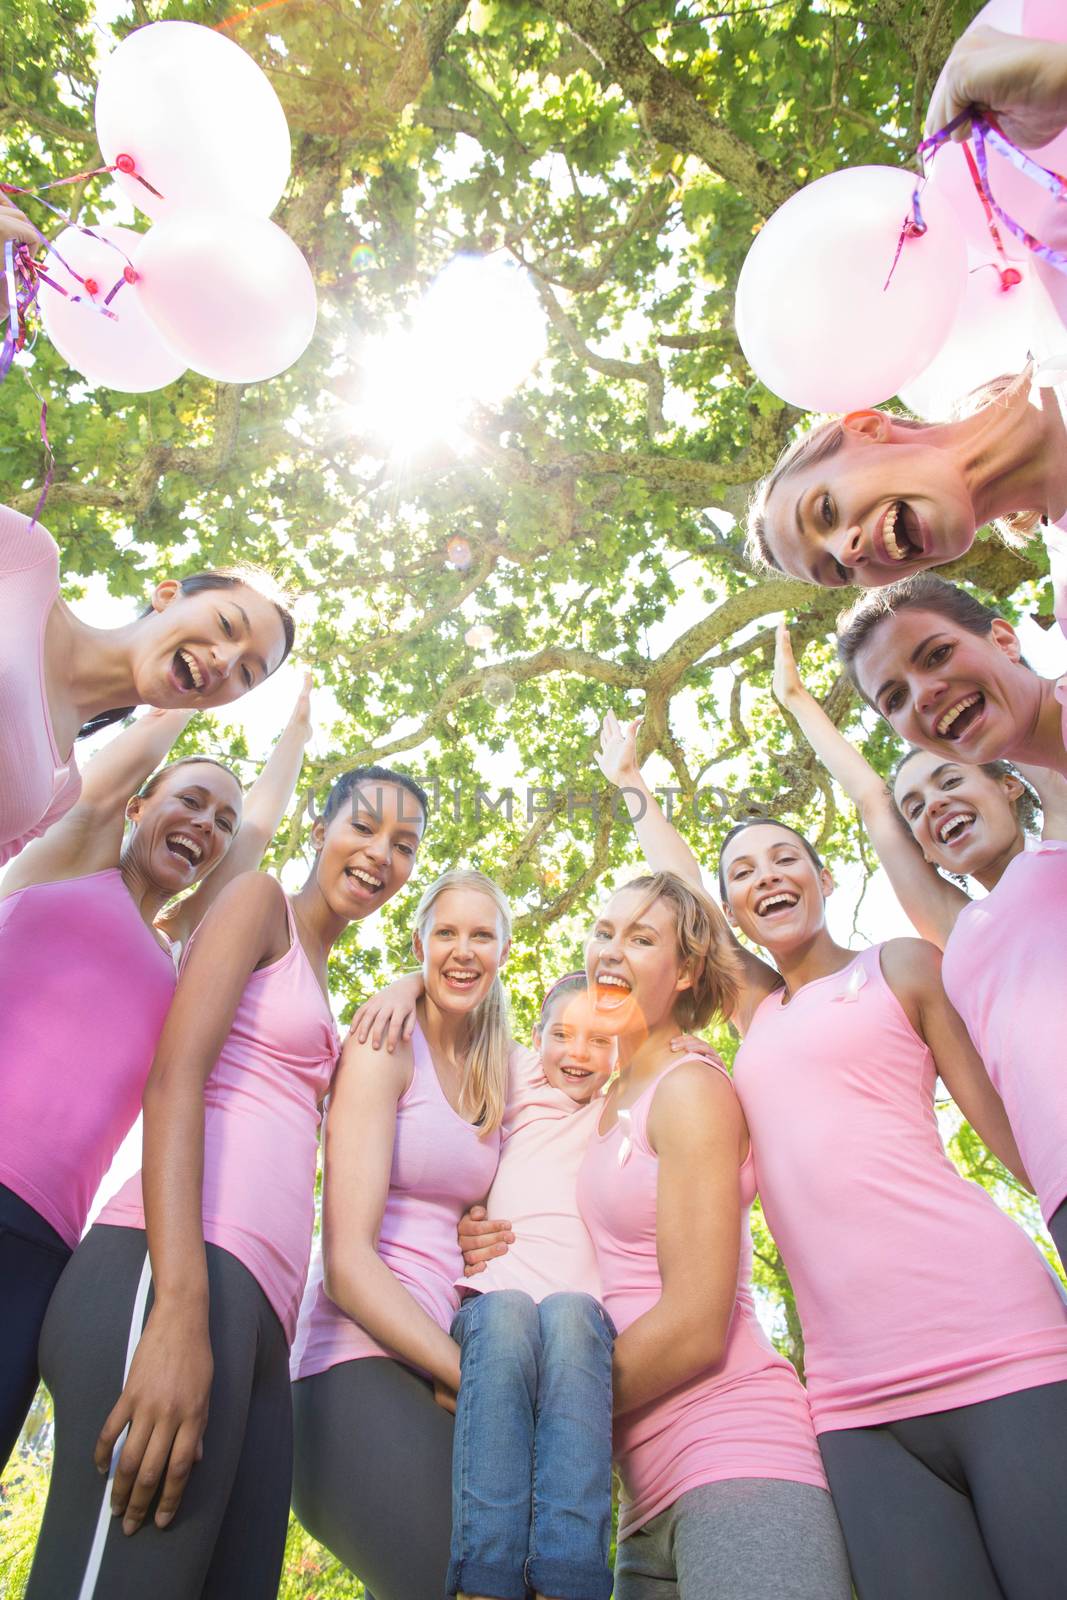 Smiling women in pink for breast cancer awareness on a sunny day